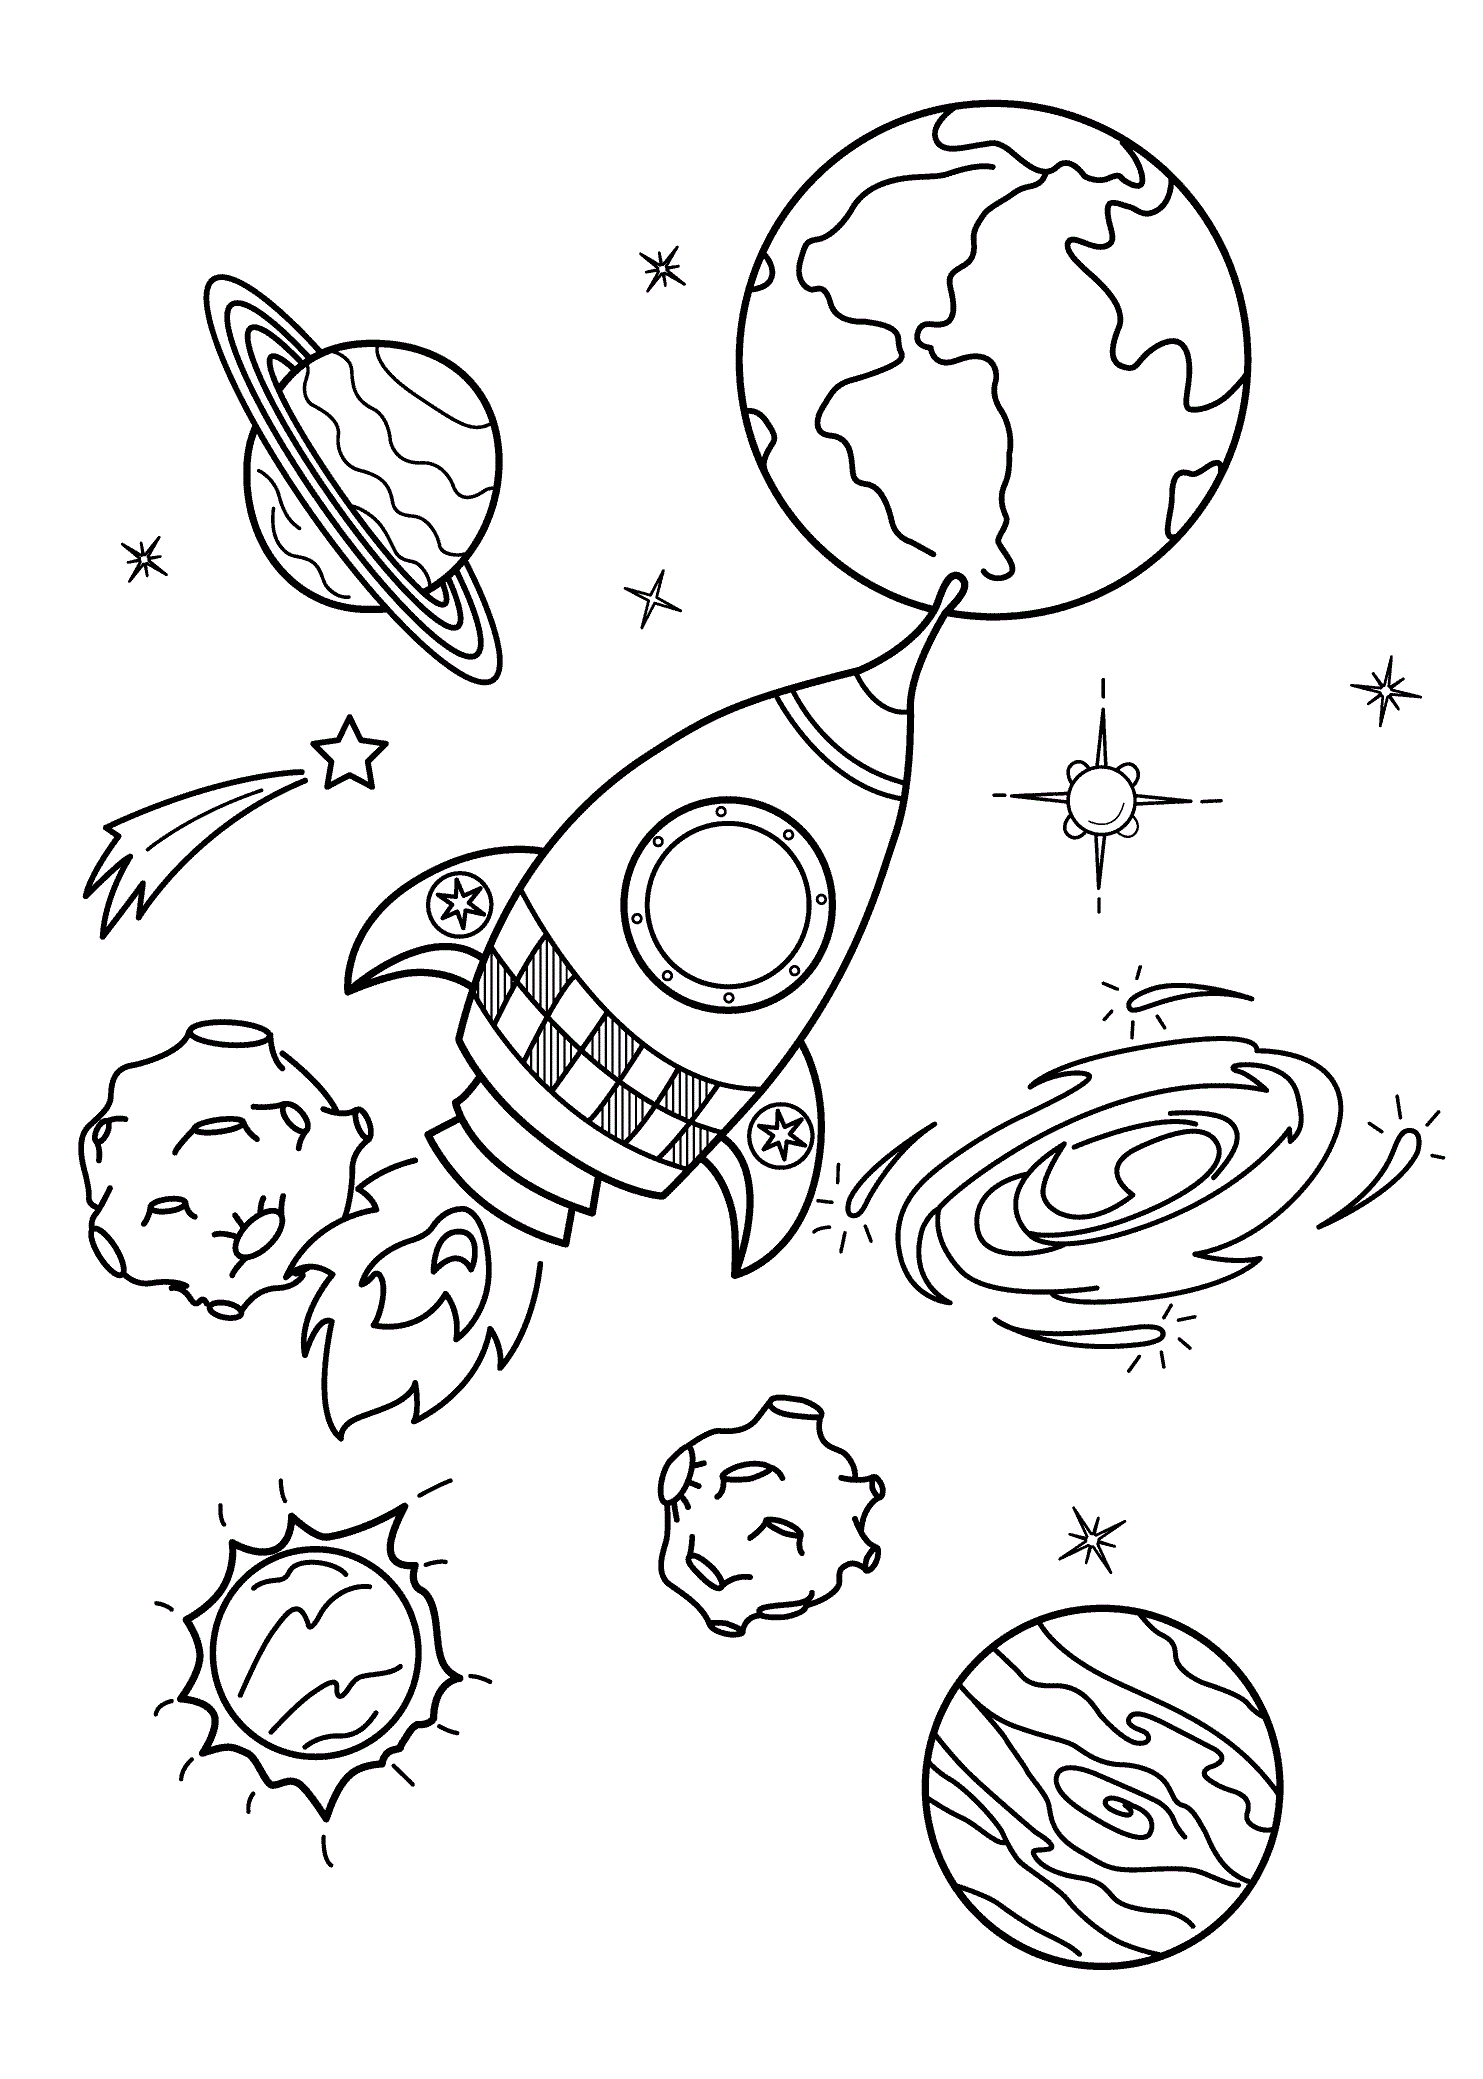 Spaceship And Planets Coloring Page - Free Printable Coloring Pages for Kids